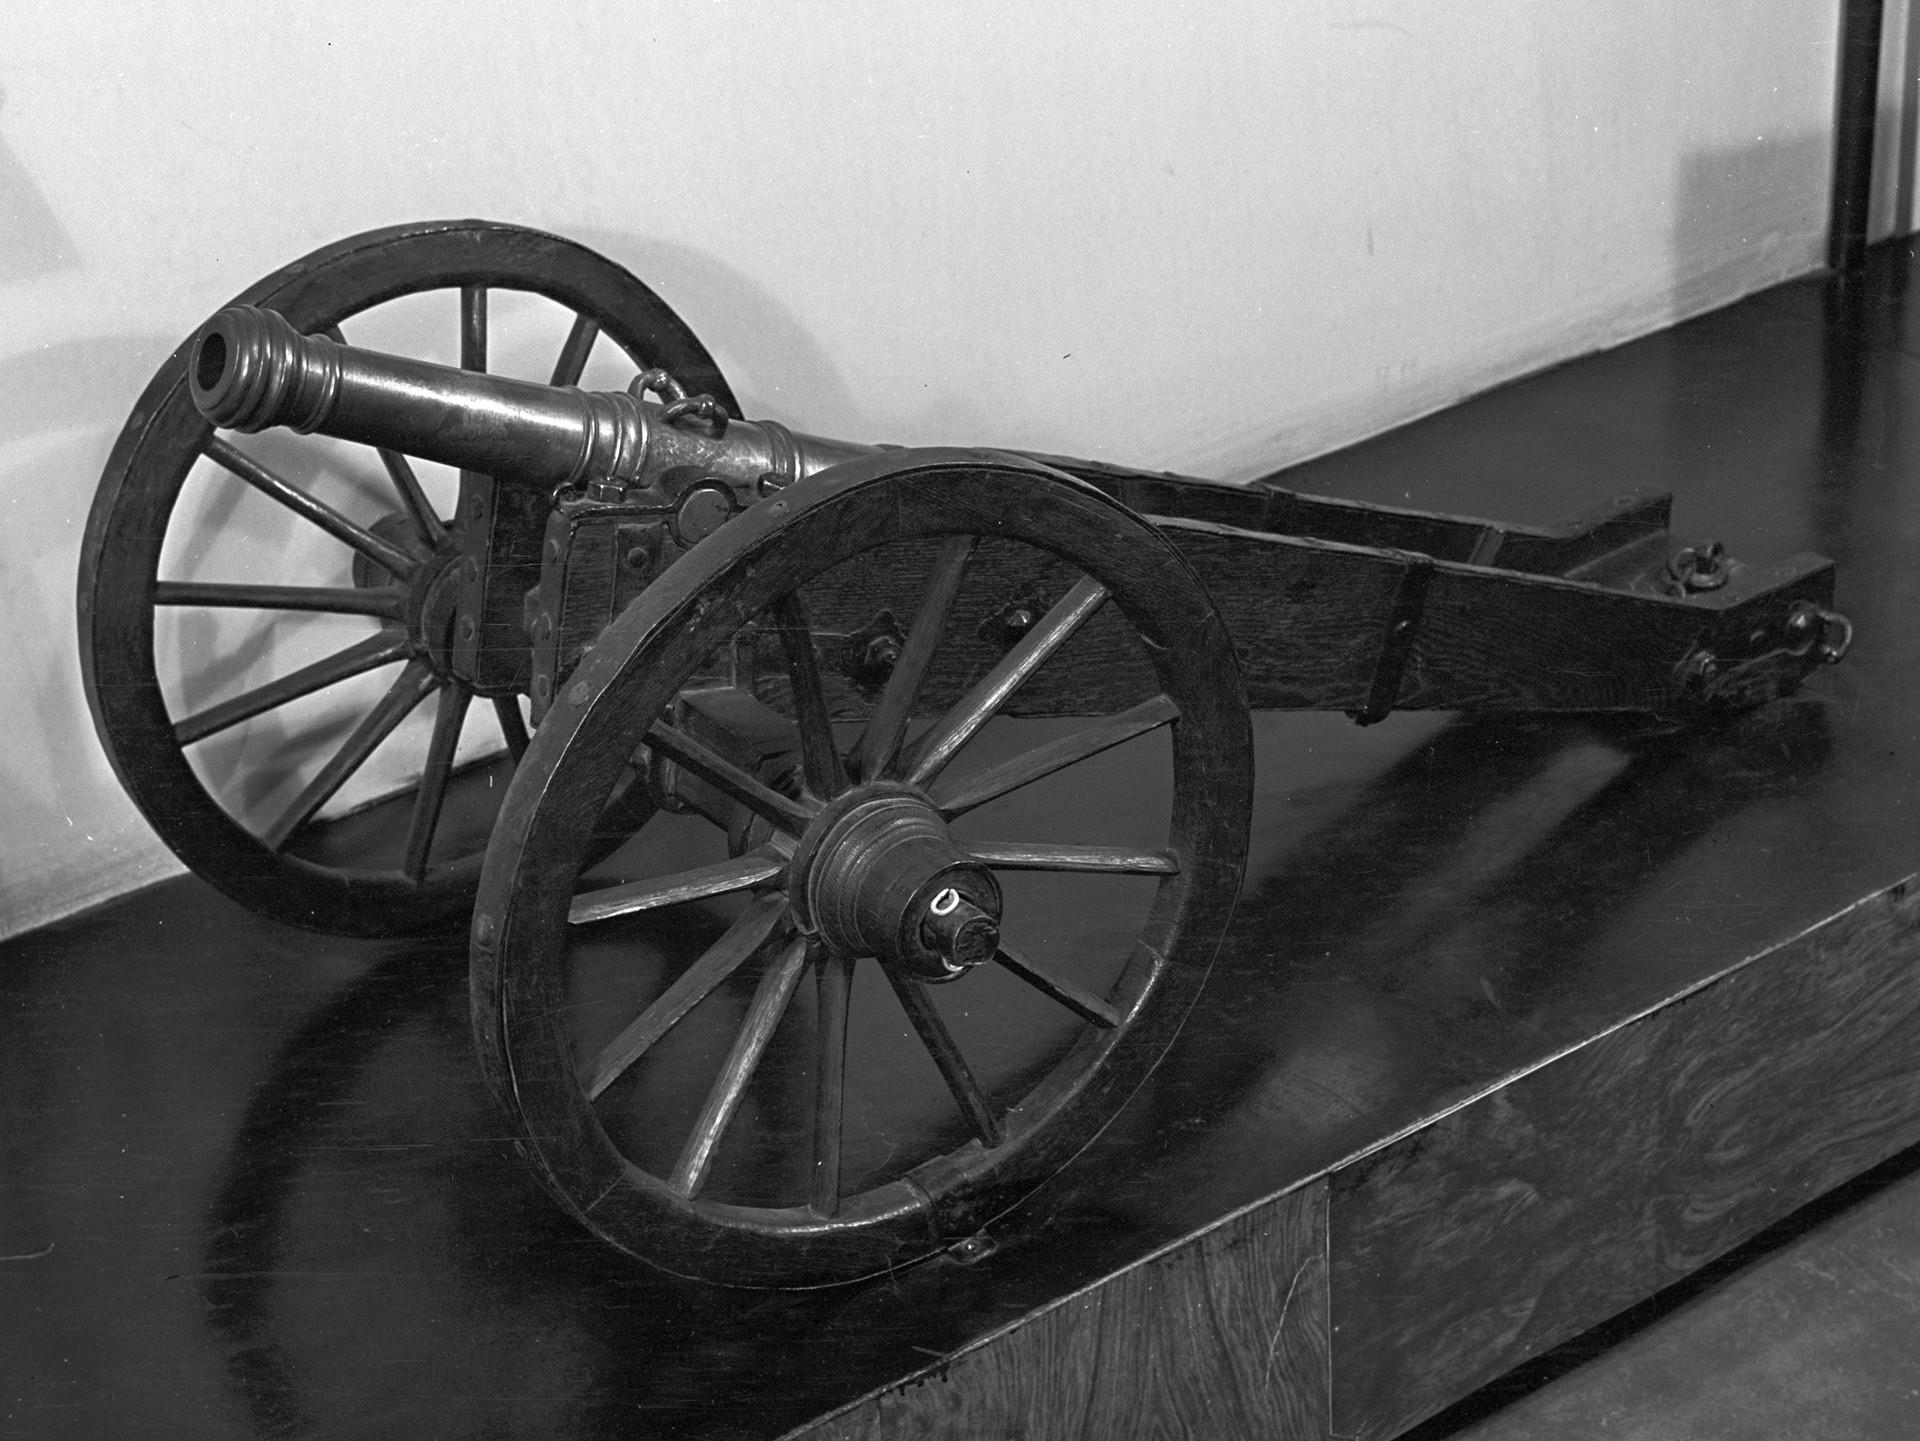 This 17th century cannon was presented by Tsar Alexis to his son, Peter the Great